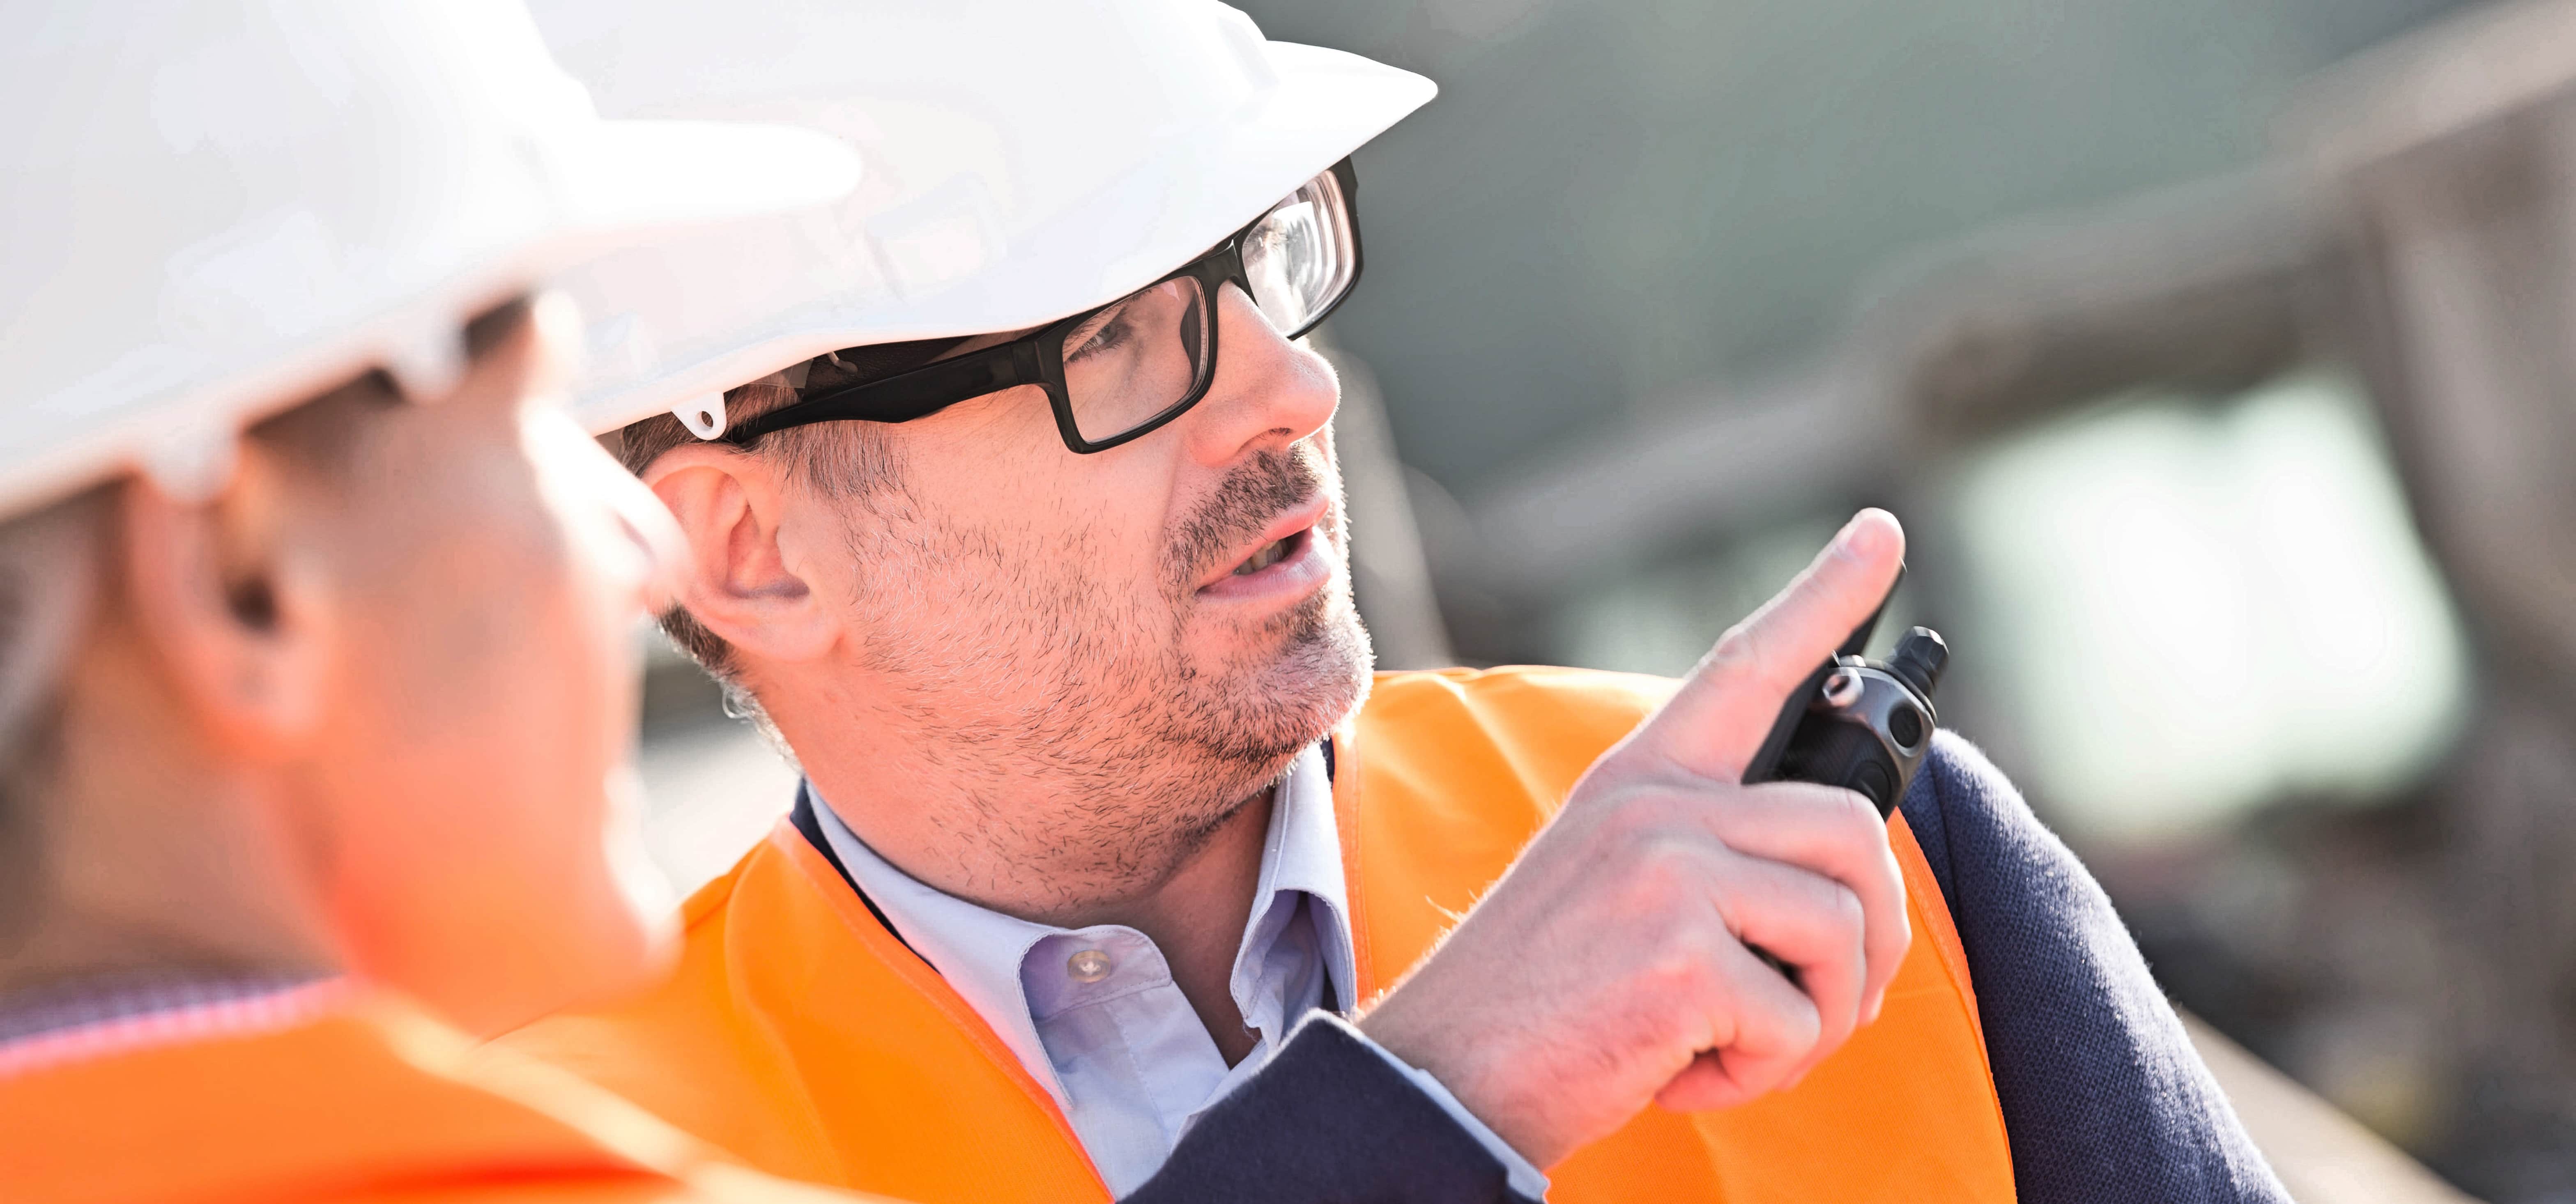 Finding A Building Surveyor: 5 Things to Look For